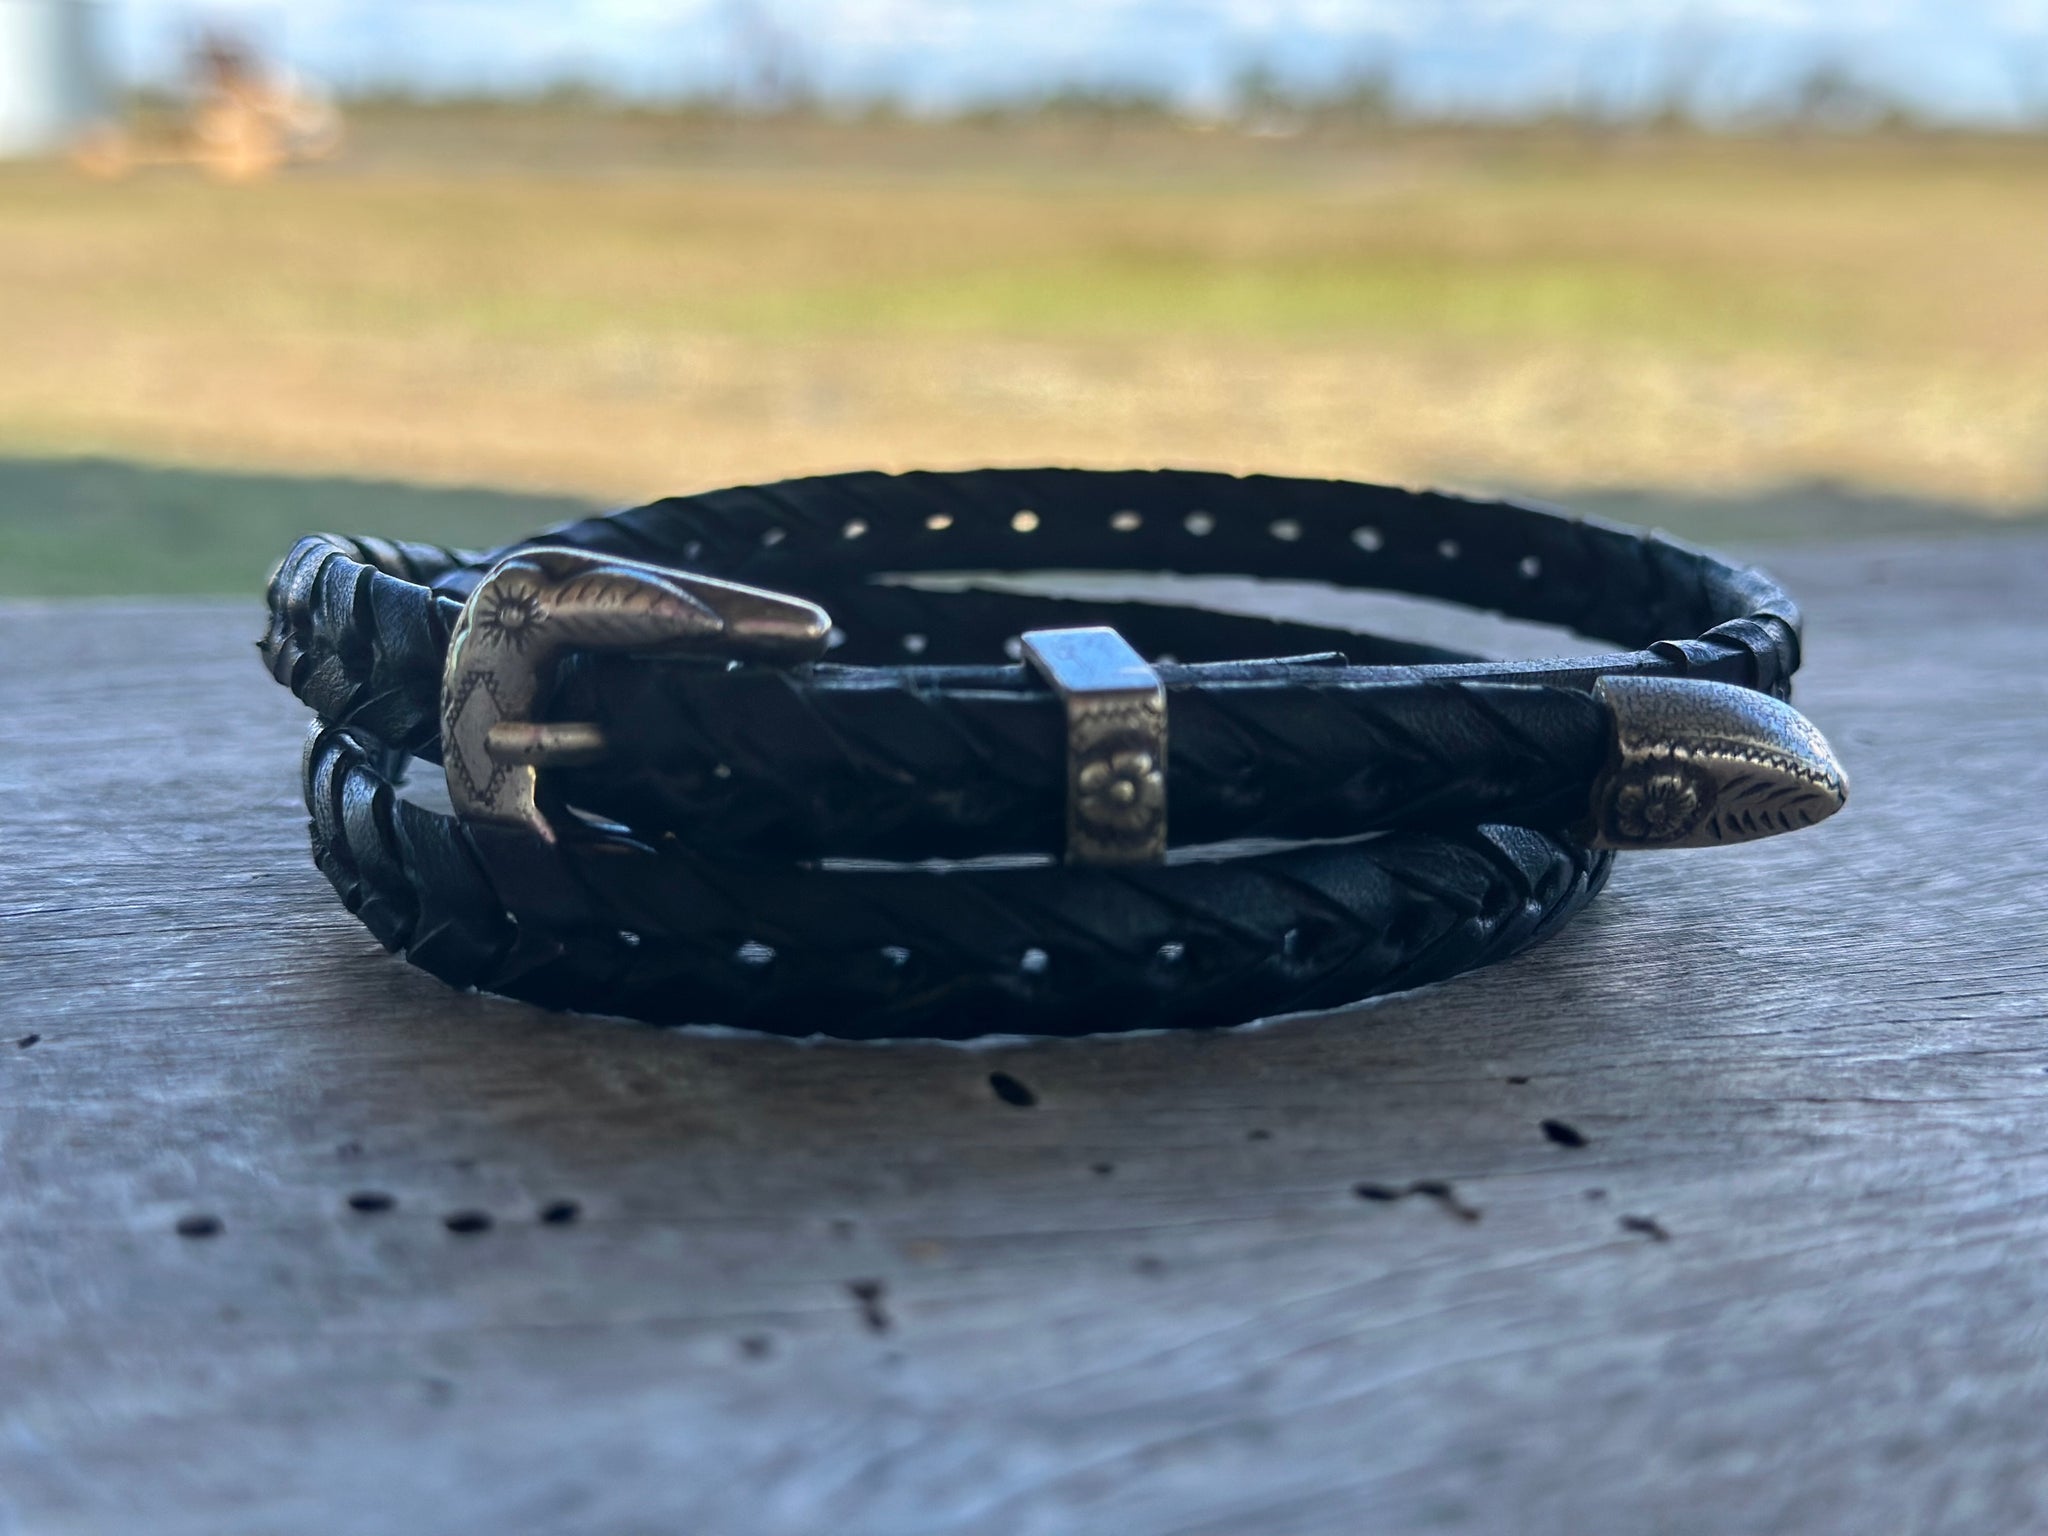 BLACK SNAKE PLAIT CROWN BAND WITH FANCY BUCKLE SET